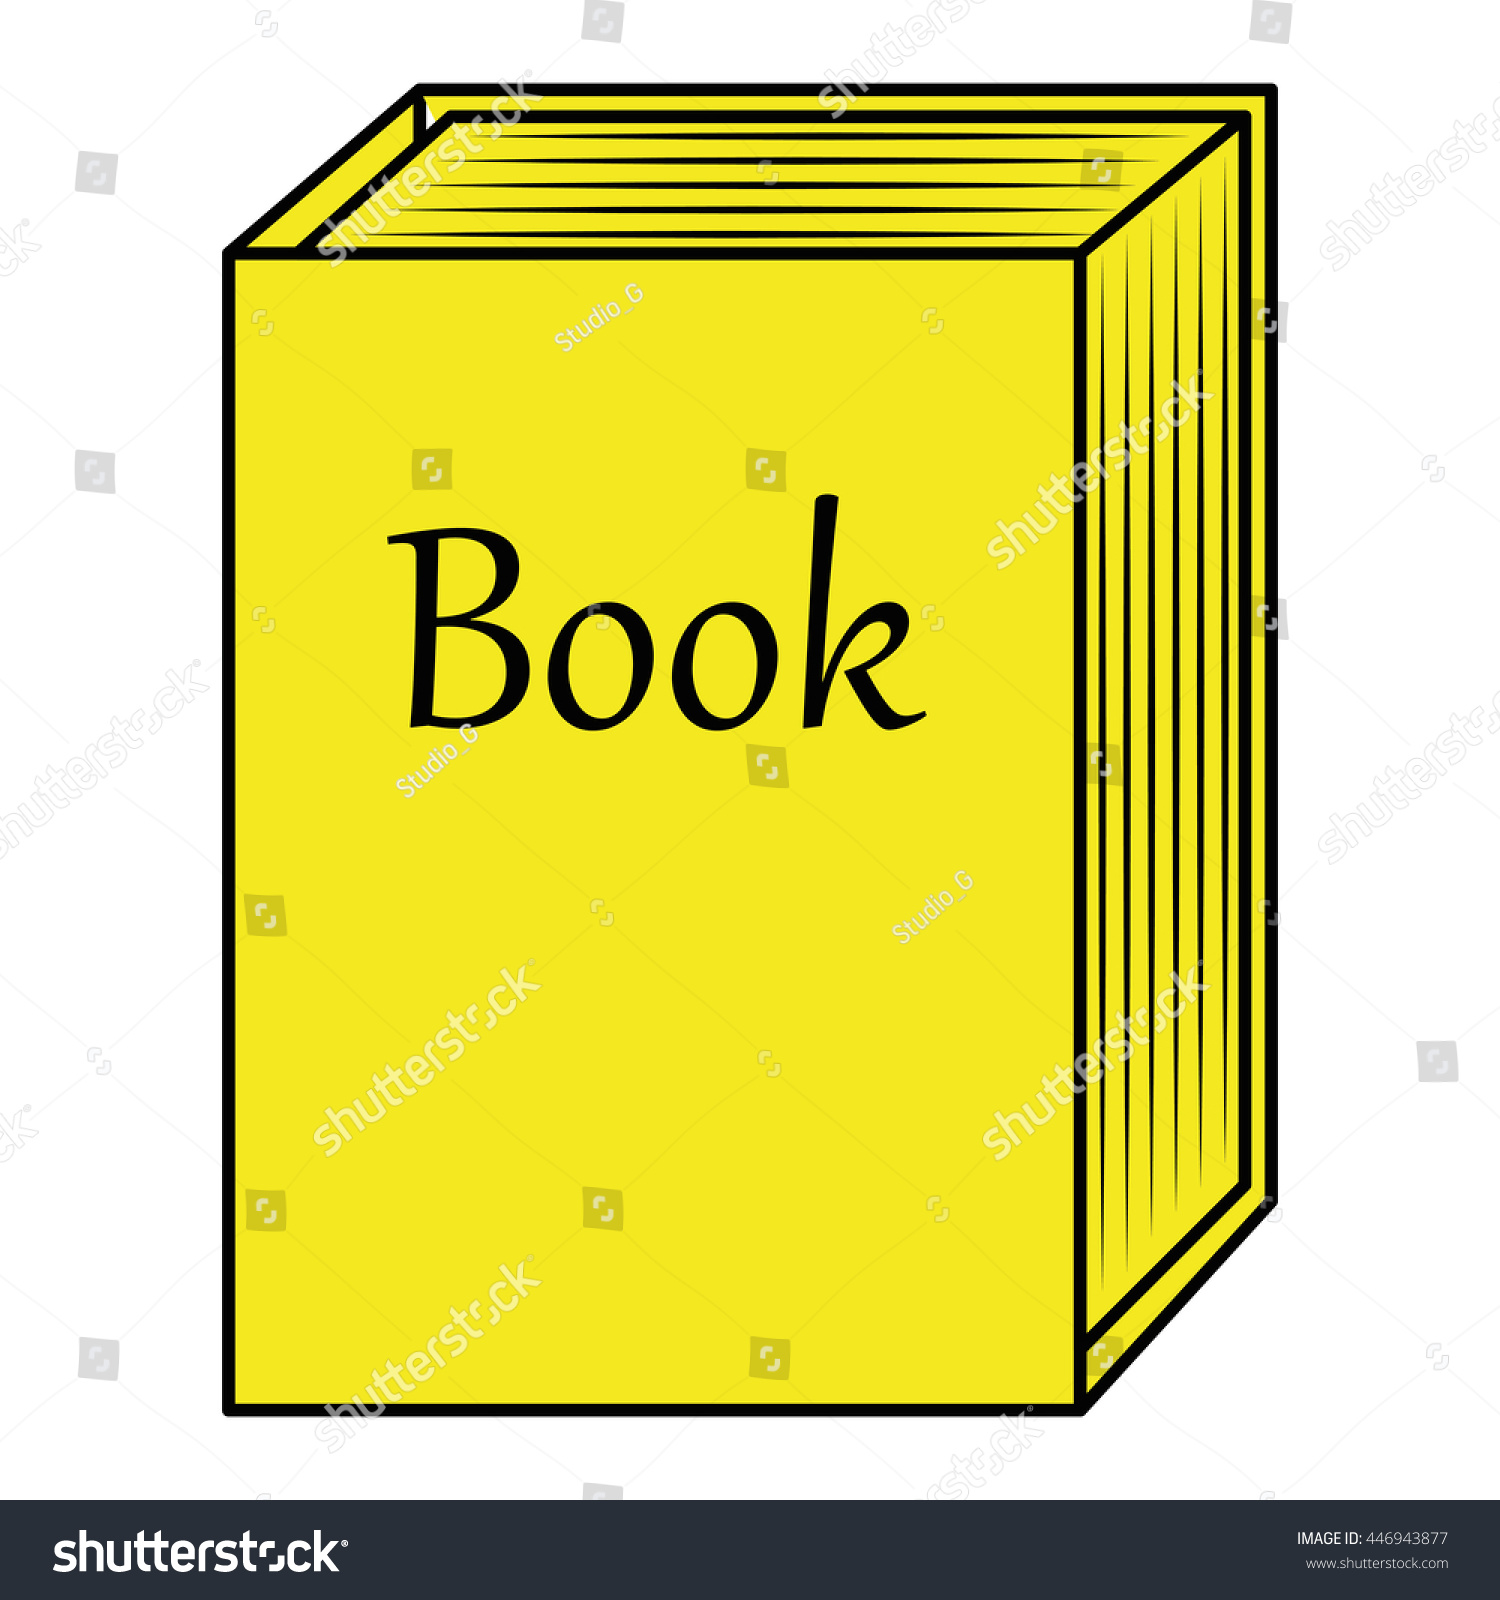 Black Yellow Books Set Front View Stock Vector 446943877 - Shutterstock